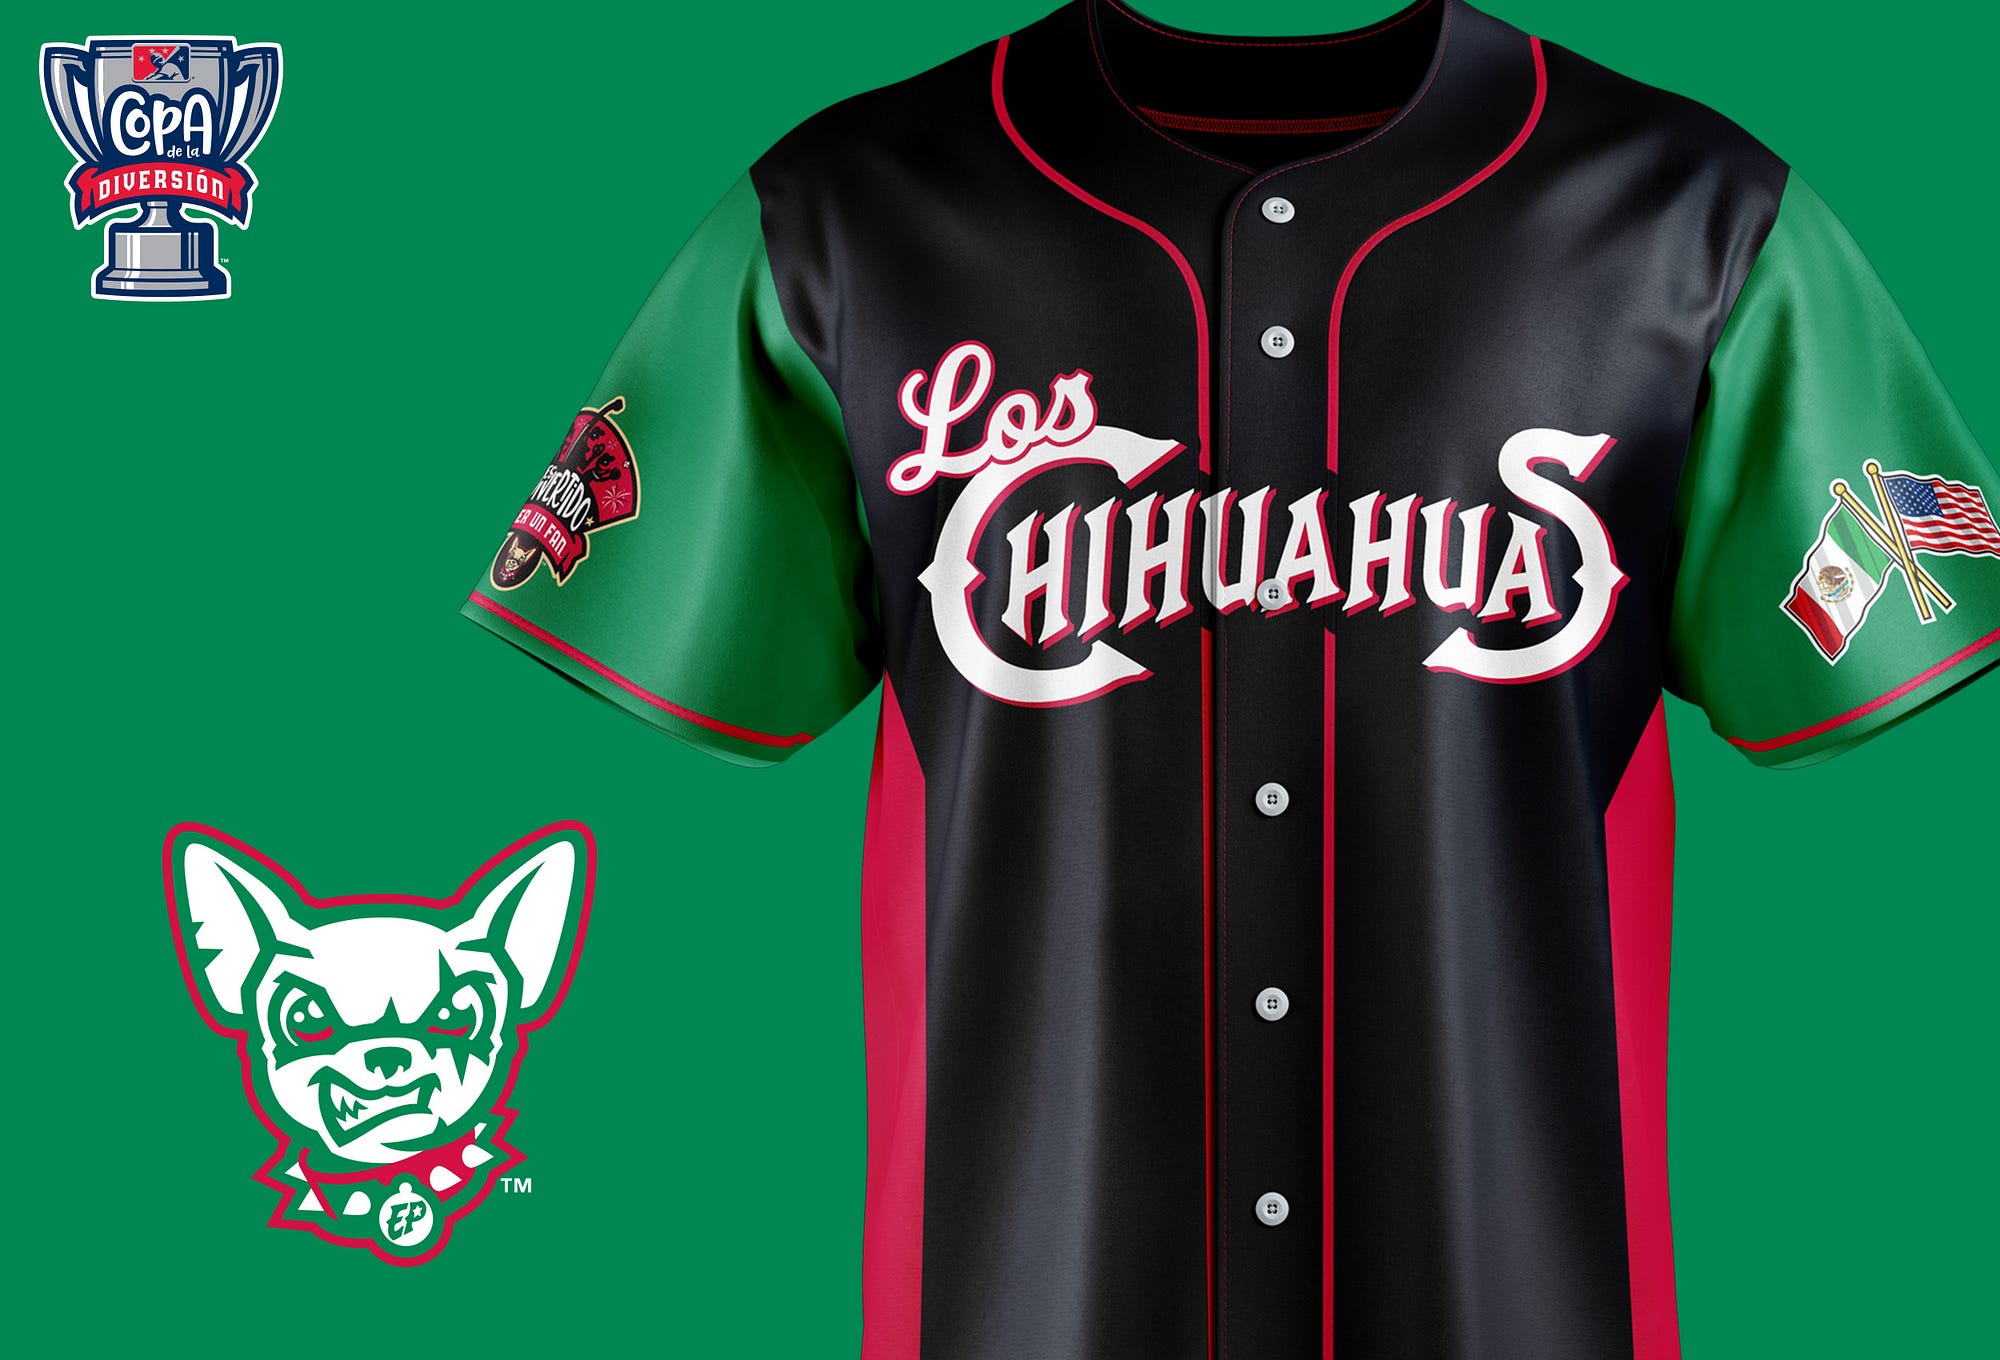 El Paso Chihuahuas to wear special jersey on August 3rd - Gaslamp Ball